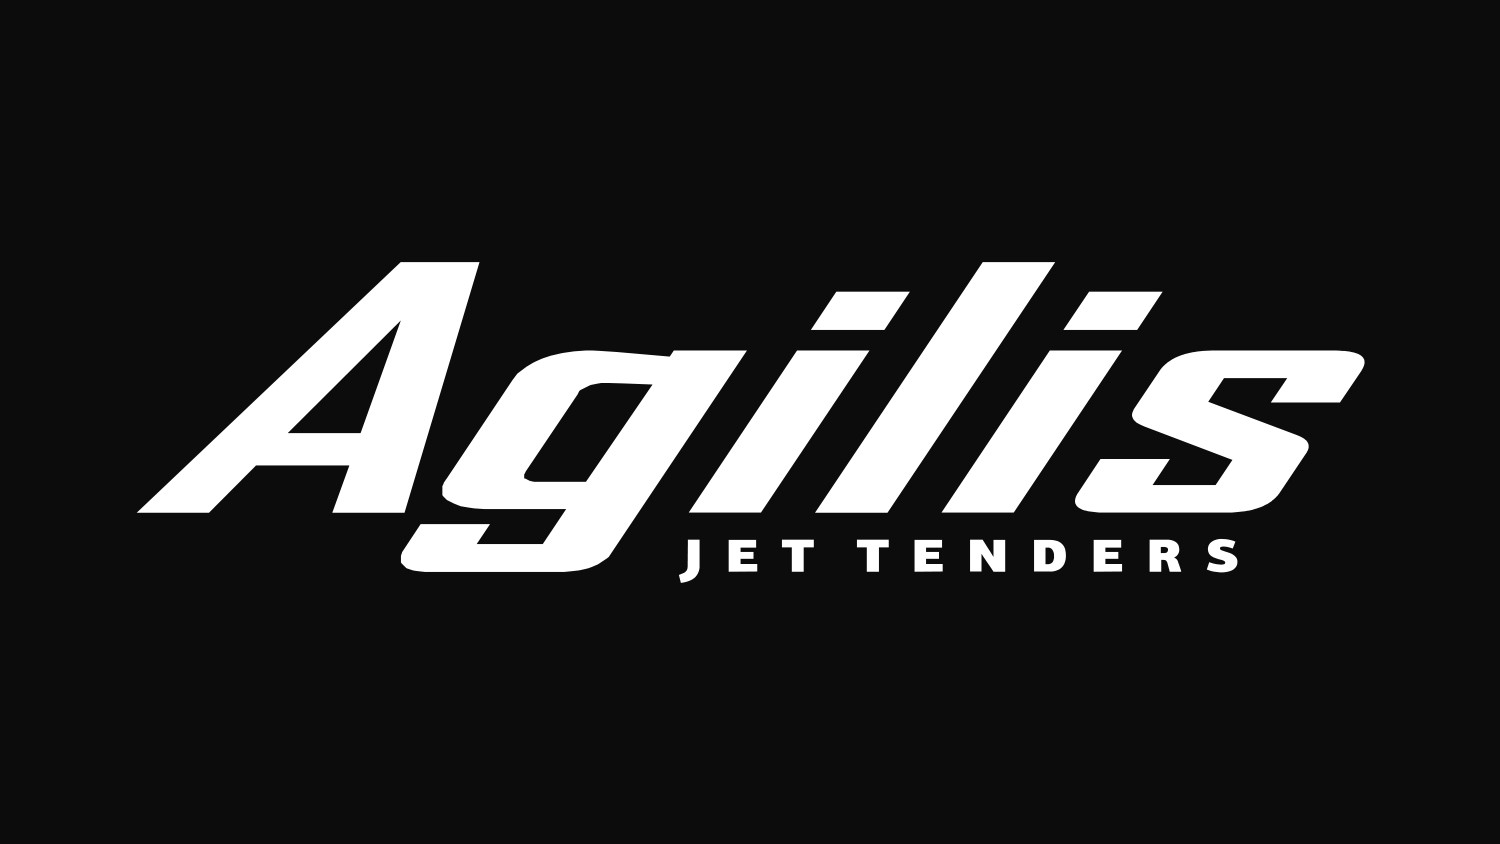 Story of the Manufacturer Agilis Jettenders